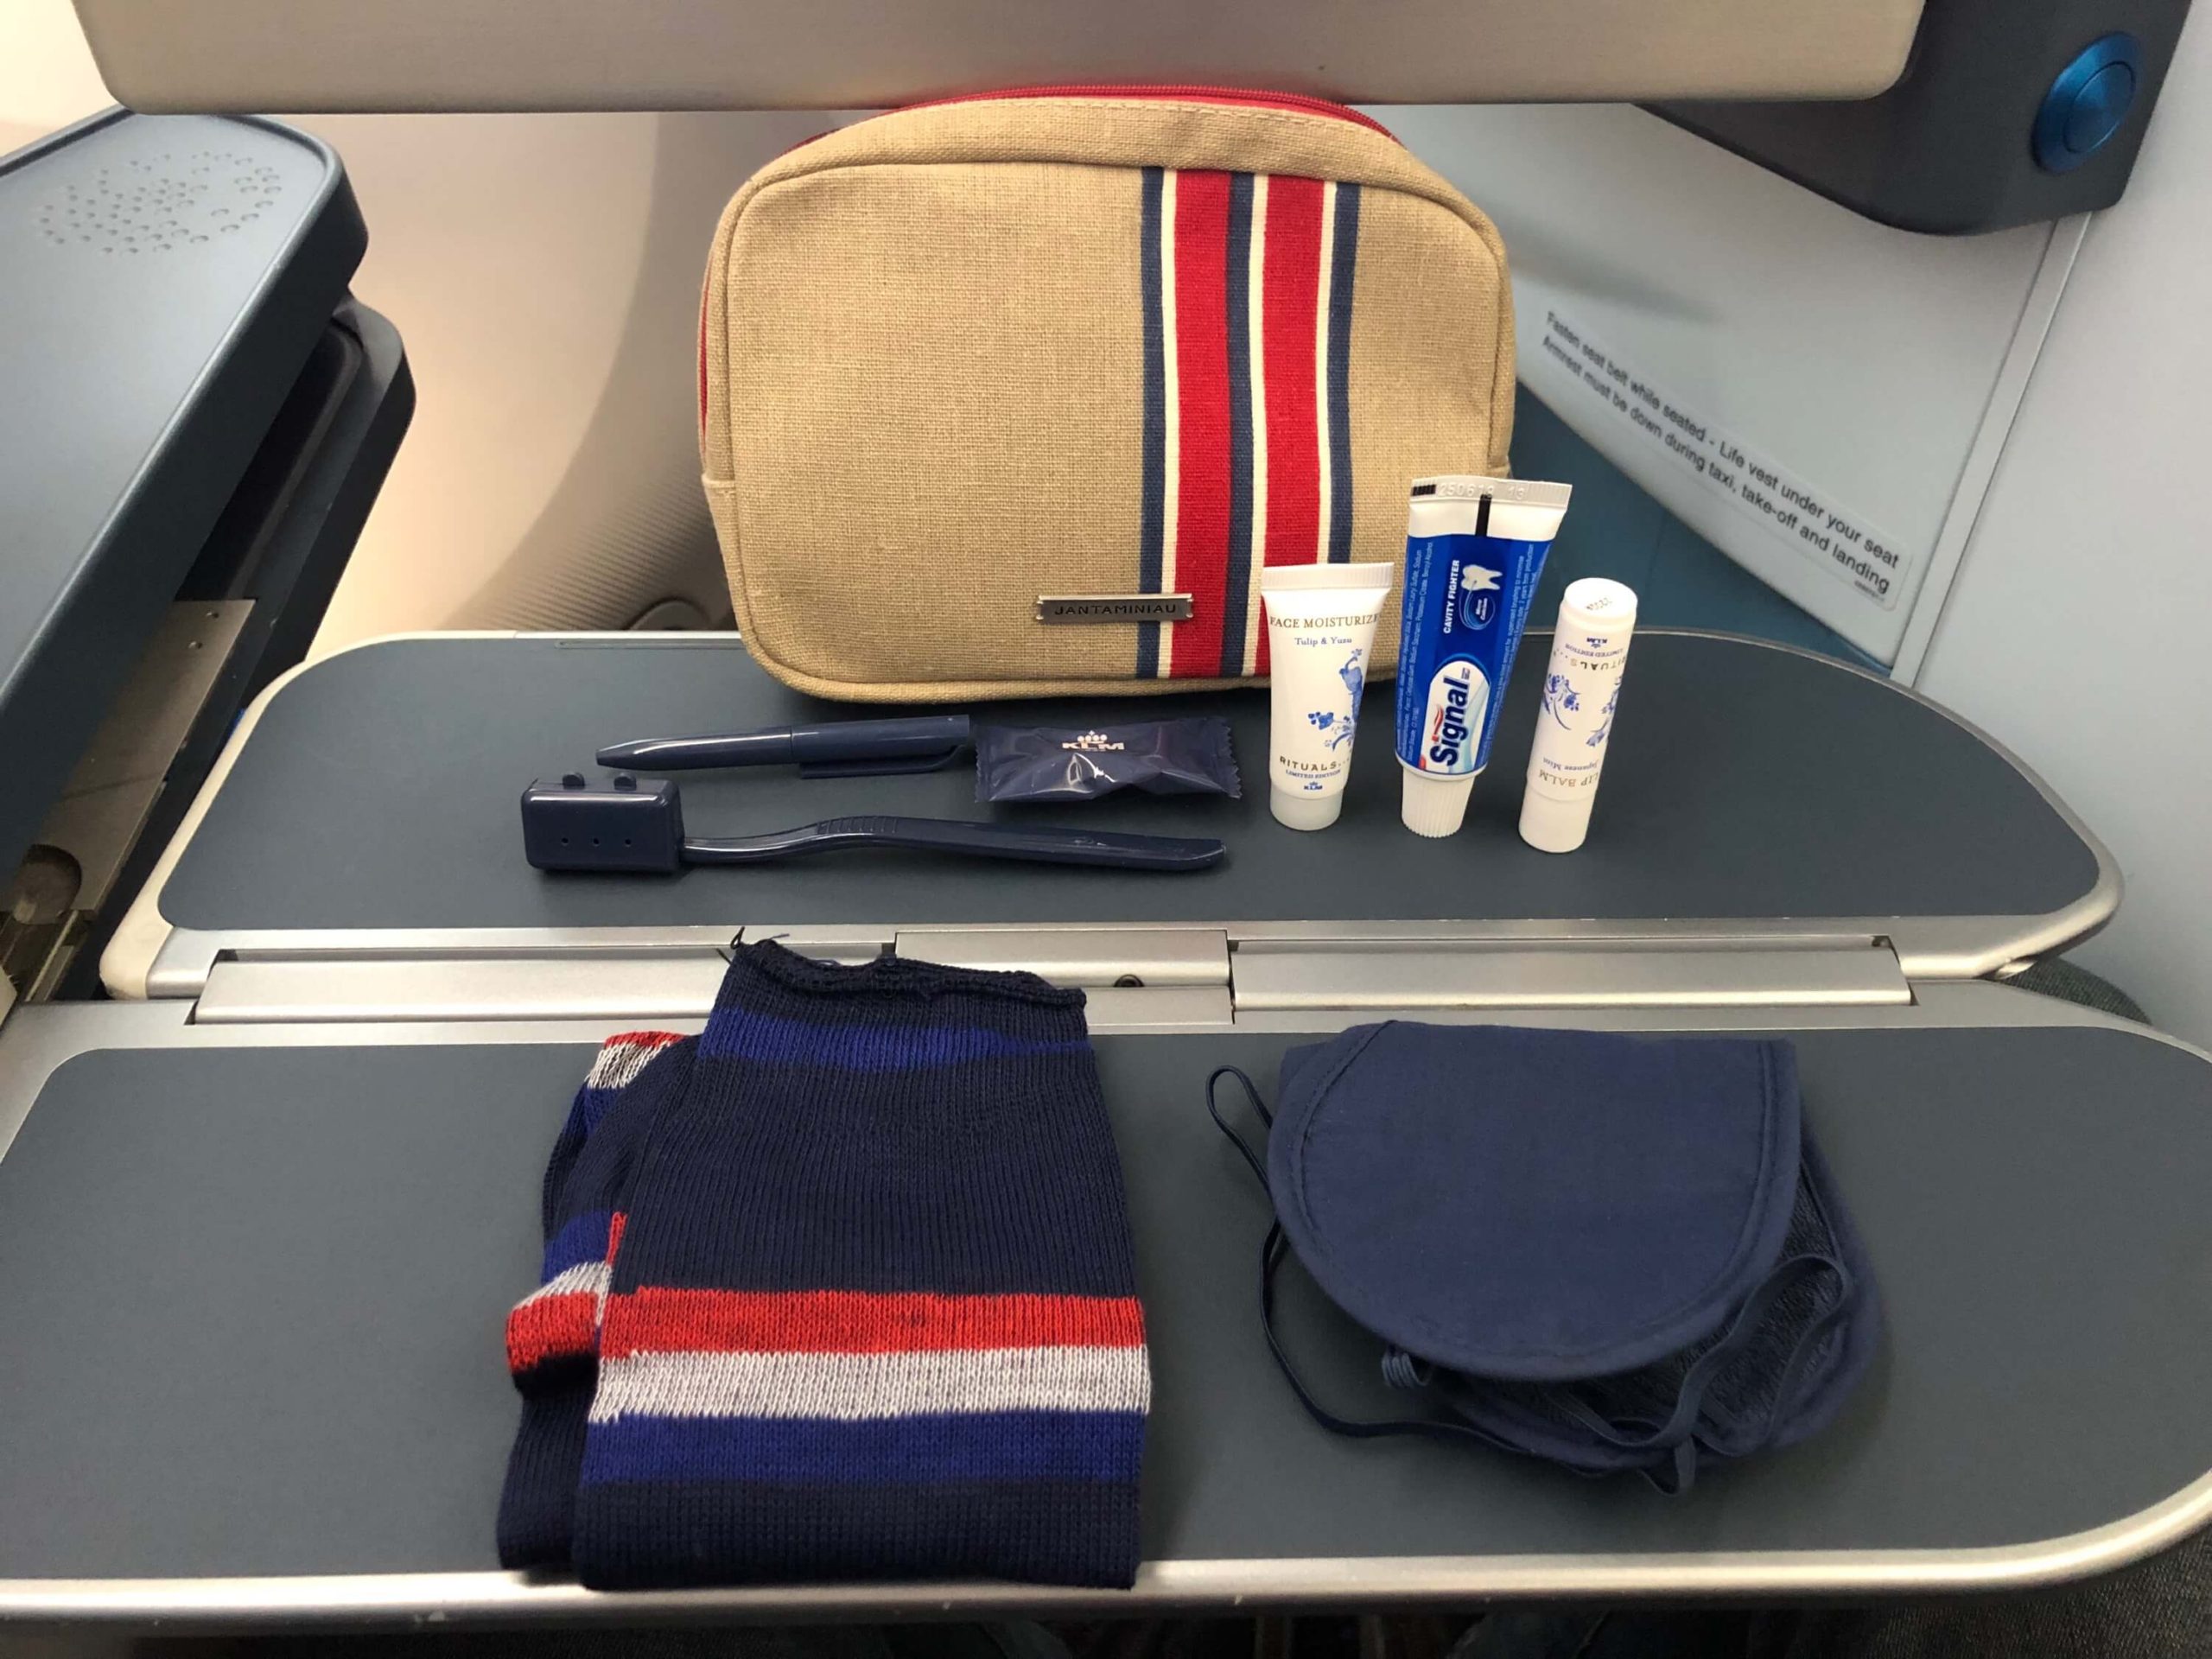 KLM, World Business Class, Dreamliner, Review, Amenity Kit Upon Boarding